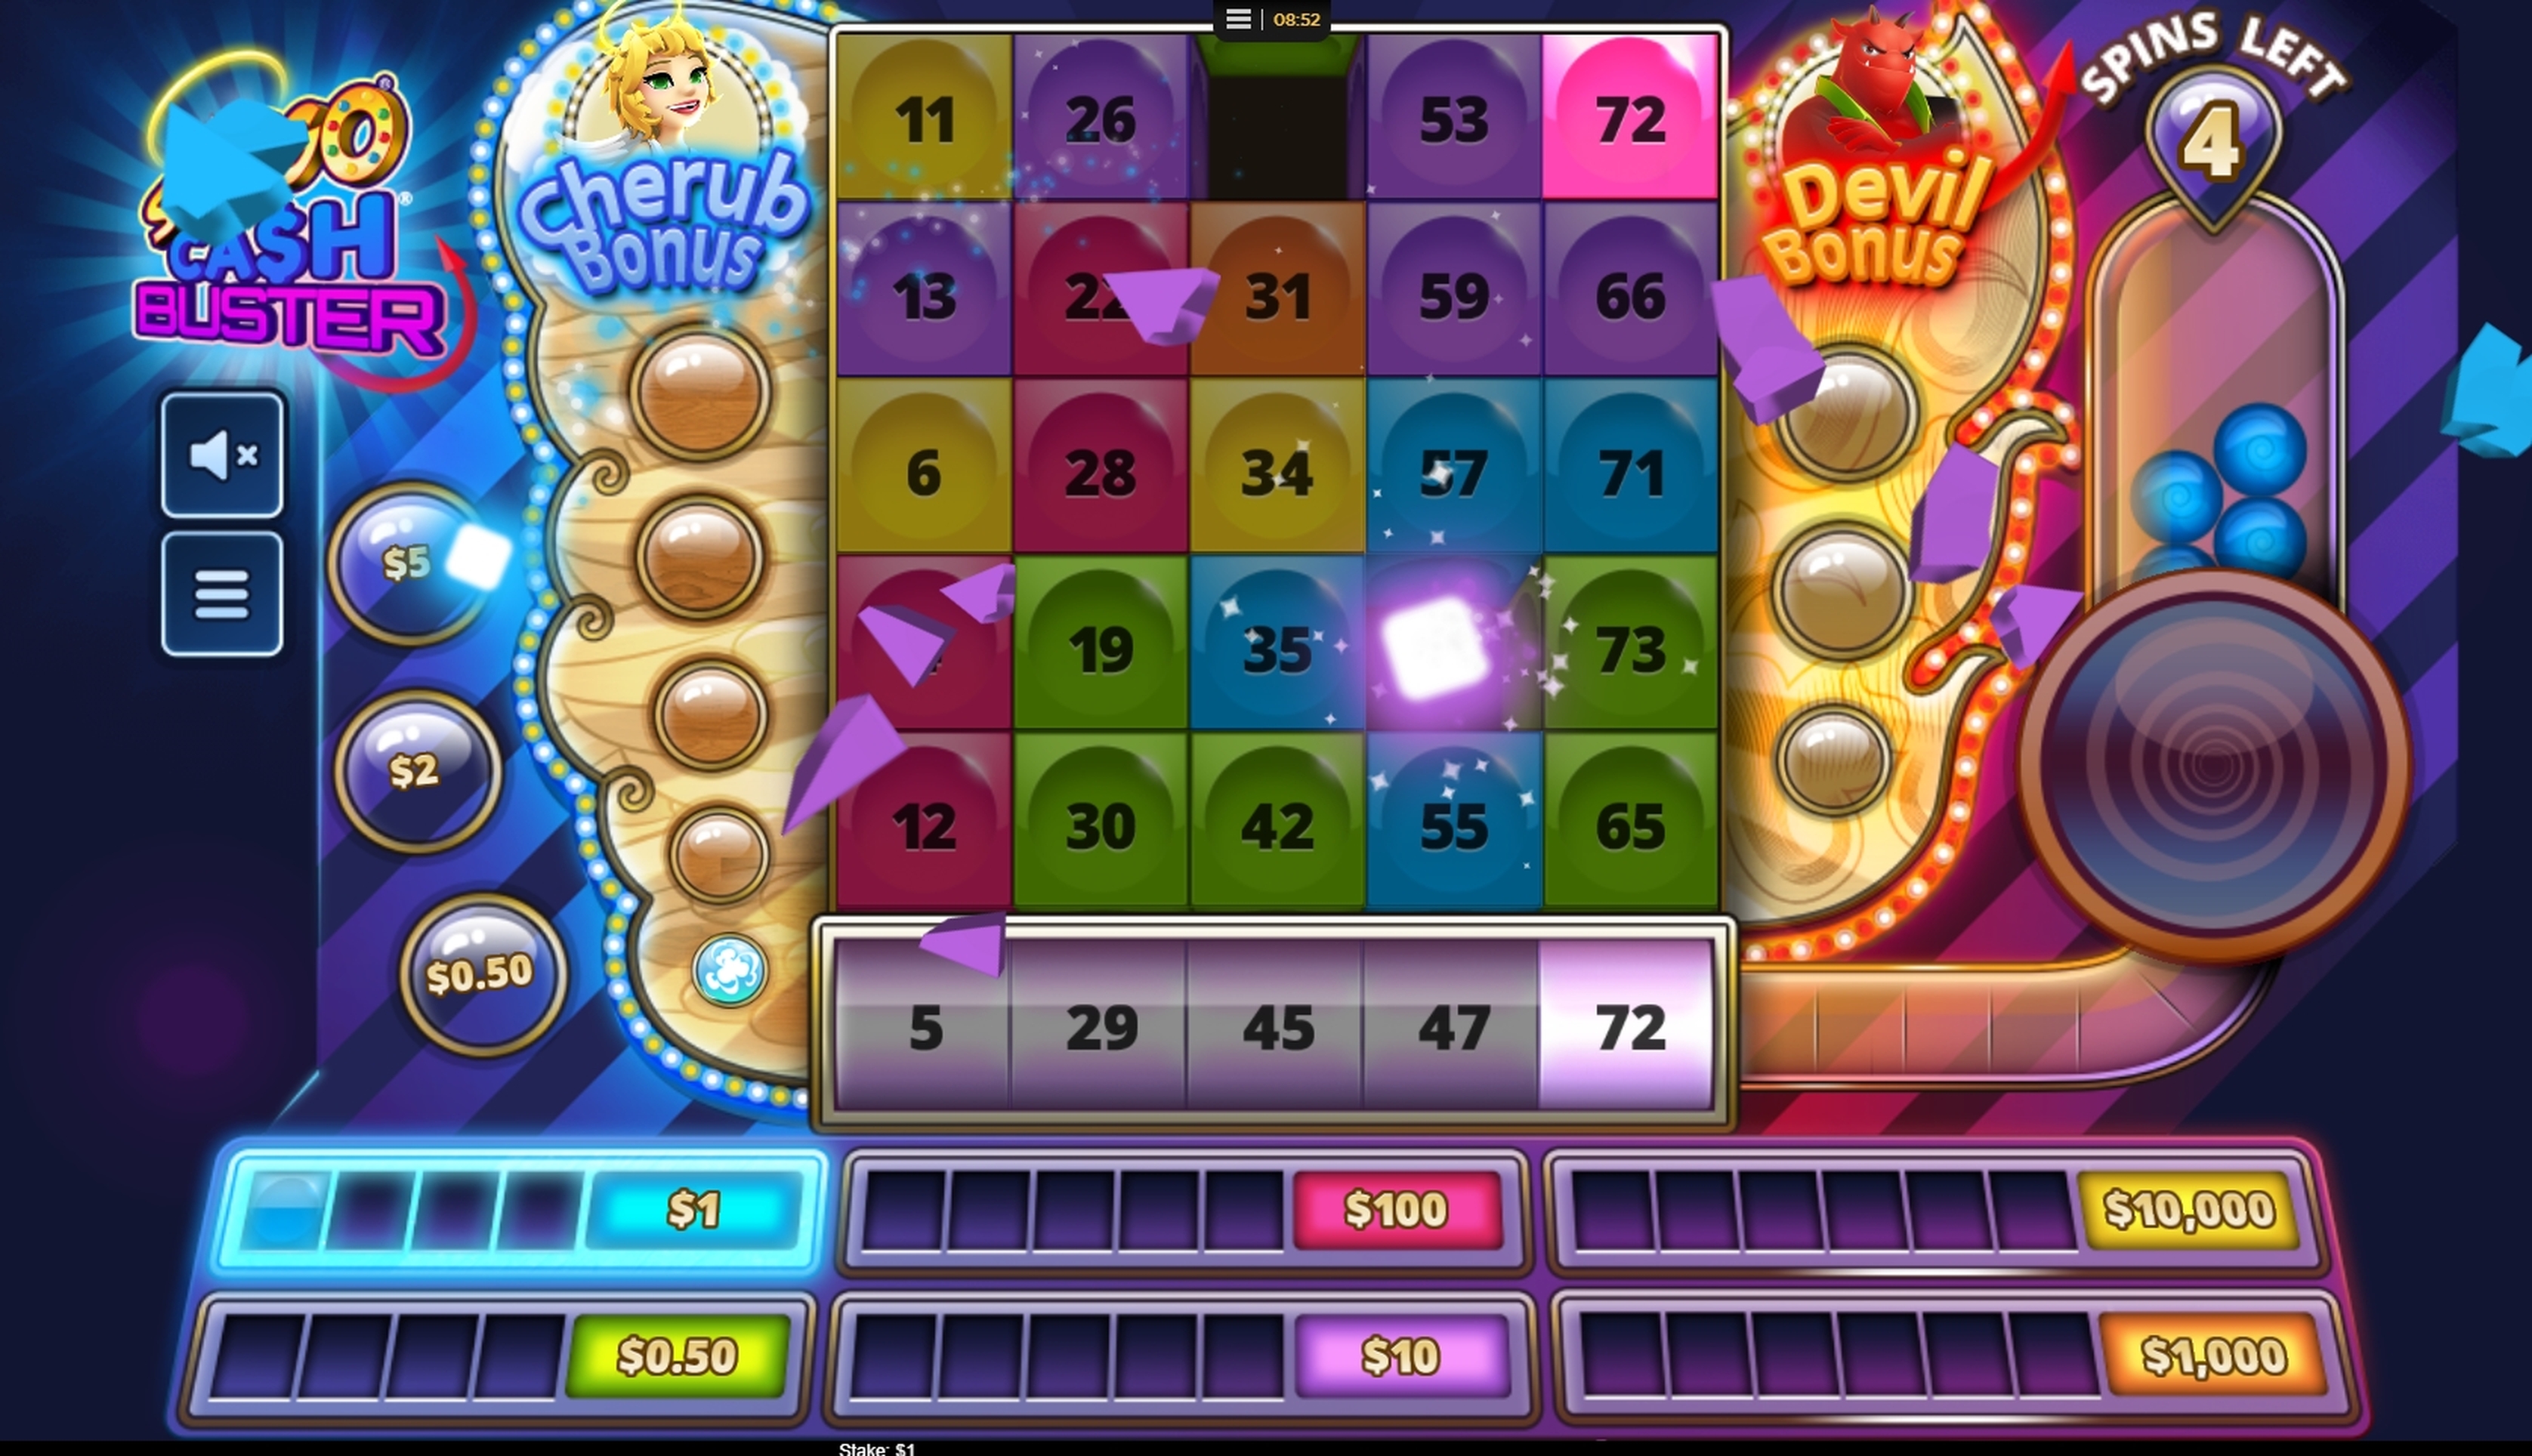 Win Money in Slingo Cash Buster Free Slot Game by IWG